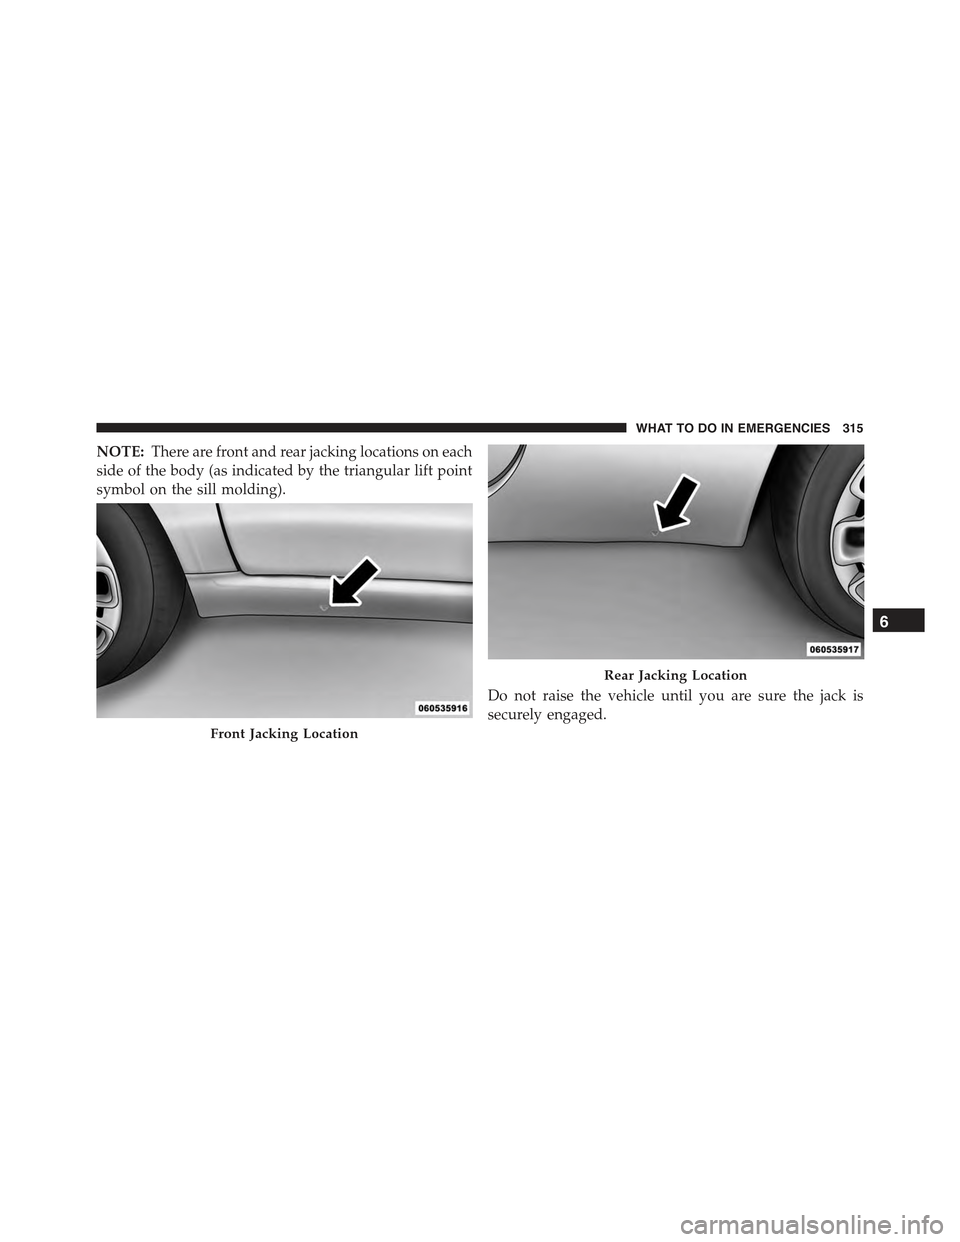 FIAT 500 2013 2.G Owners Manual NOTE:There are front and rear jacking locations on each
side of the body (as indicated by the triangular lift point
symbol on the sill molding).
Do not raise the vehicle until you are sure the jack is